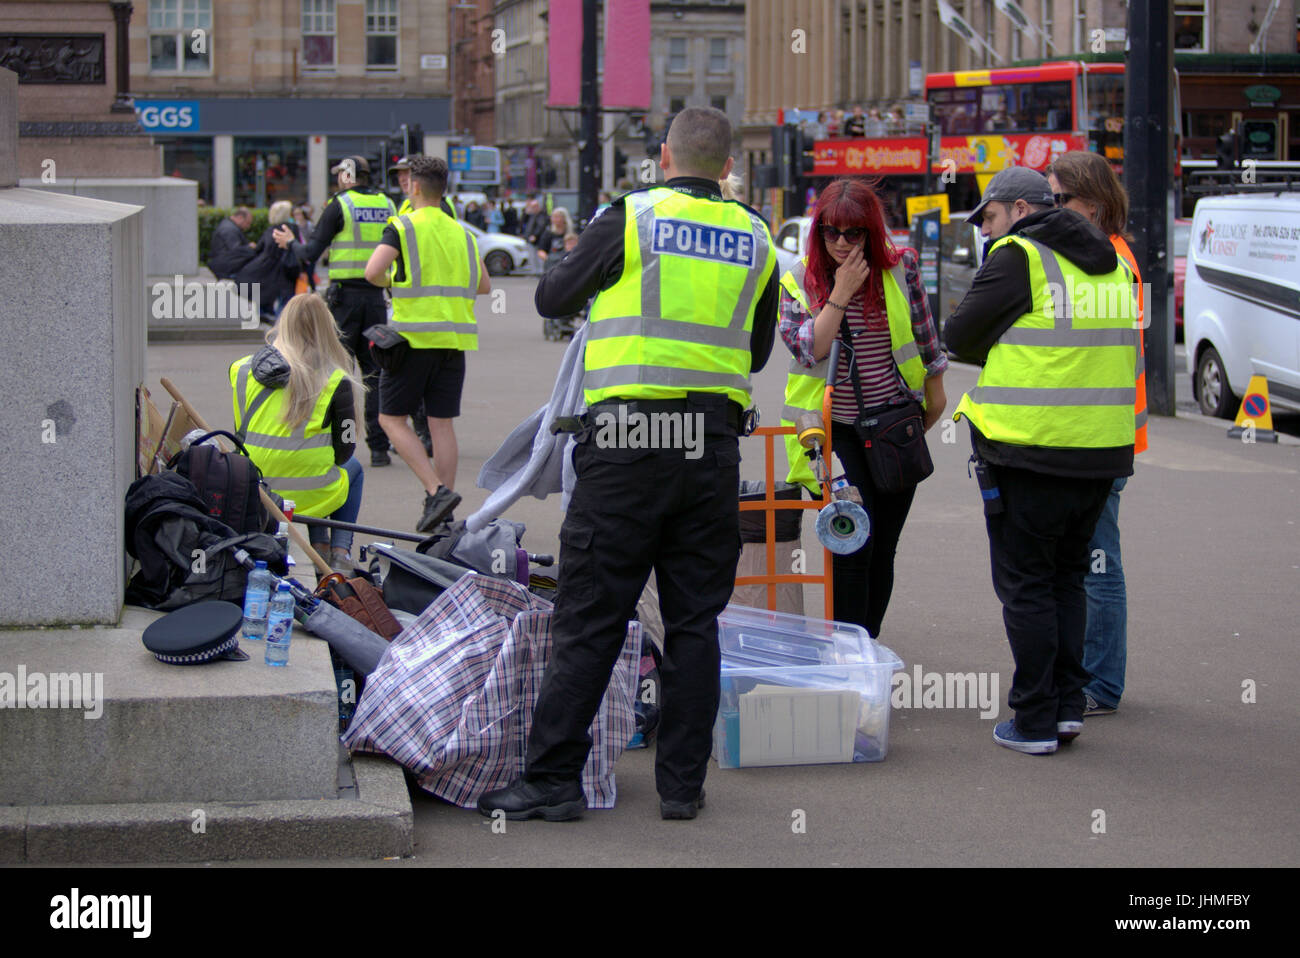 Glasgow, Scotland, UK. 14th July. Filming was nonchalantly ignored today by locals now getting used to media and film crews in the city as people passed their lunchtime with the latest series of  the BBC Scotland spoof police comedy “Scot squad” was being shot in the city's George Square, Credit: gerard ferry/Alamy Live News Stock Photo